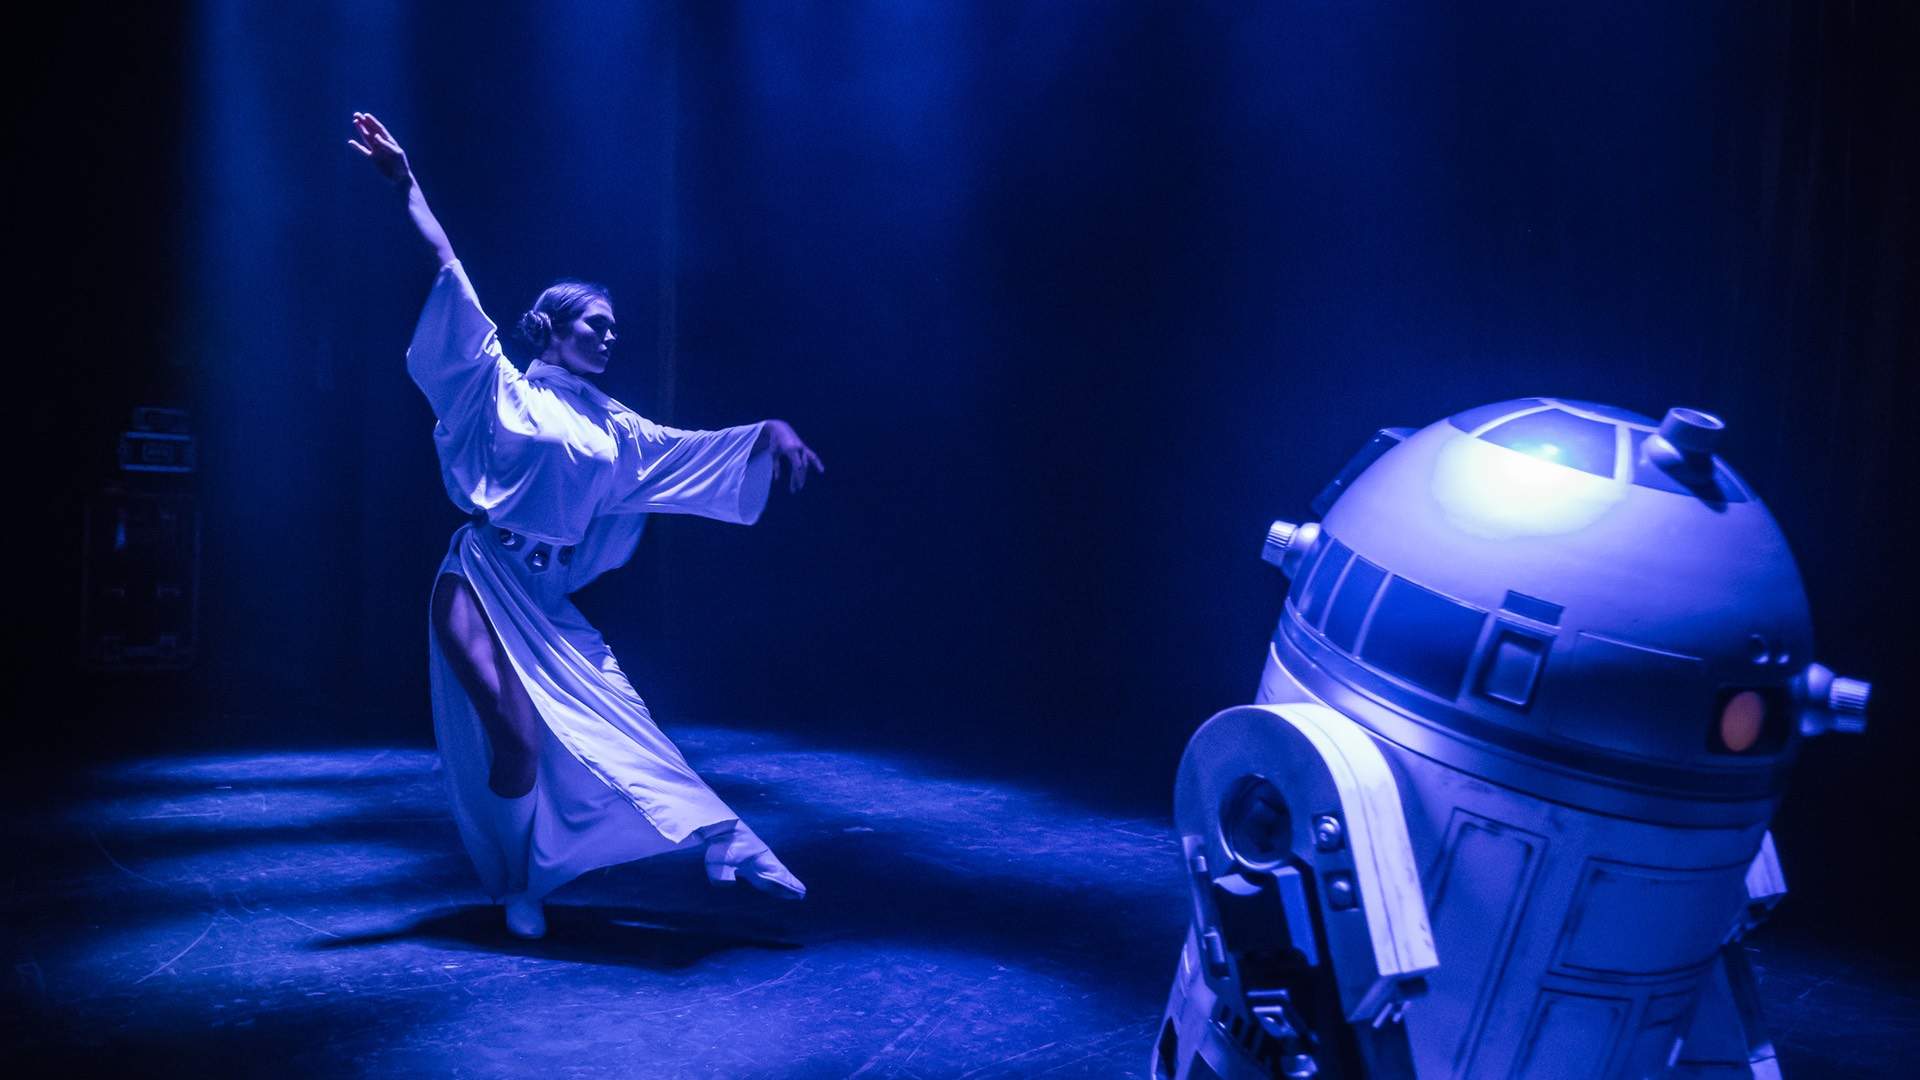 This OTT Burlesque Is the All-Singing All-Stripping Star Wars Show You Never Knew You Needed